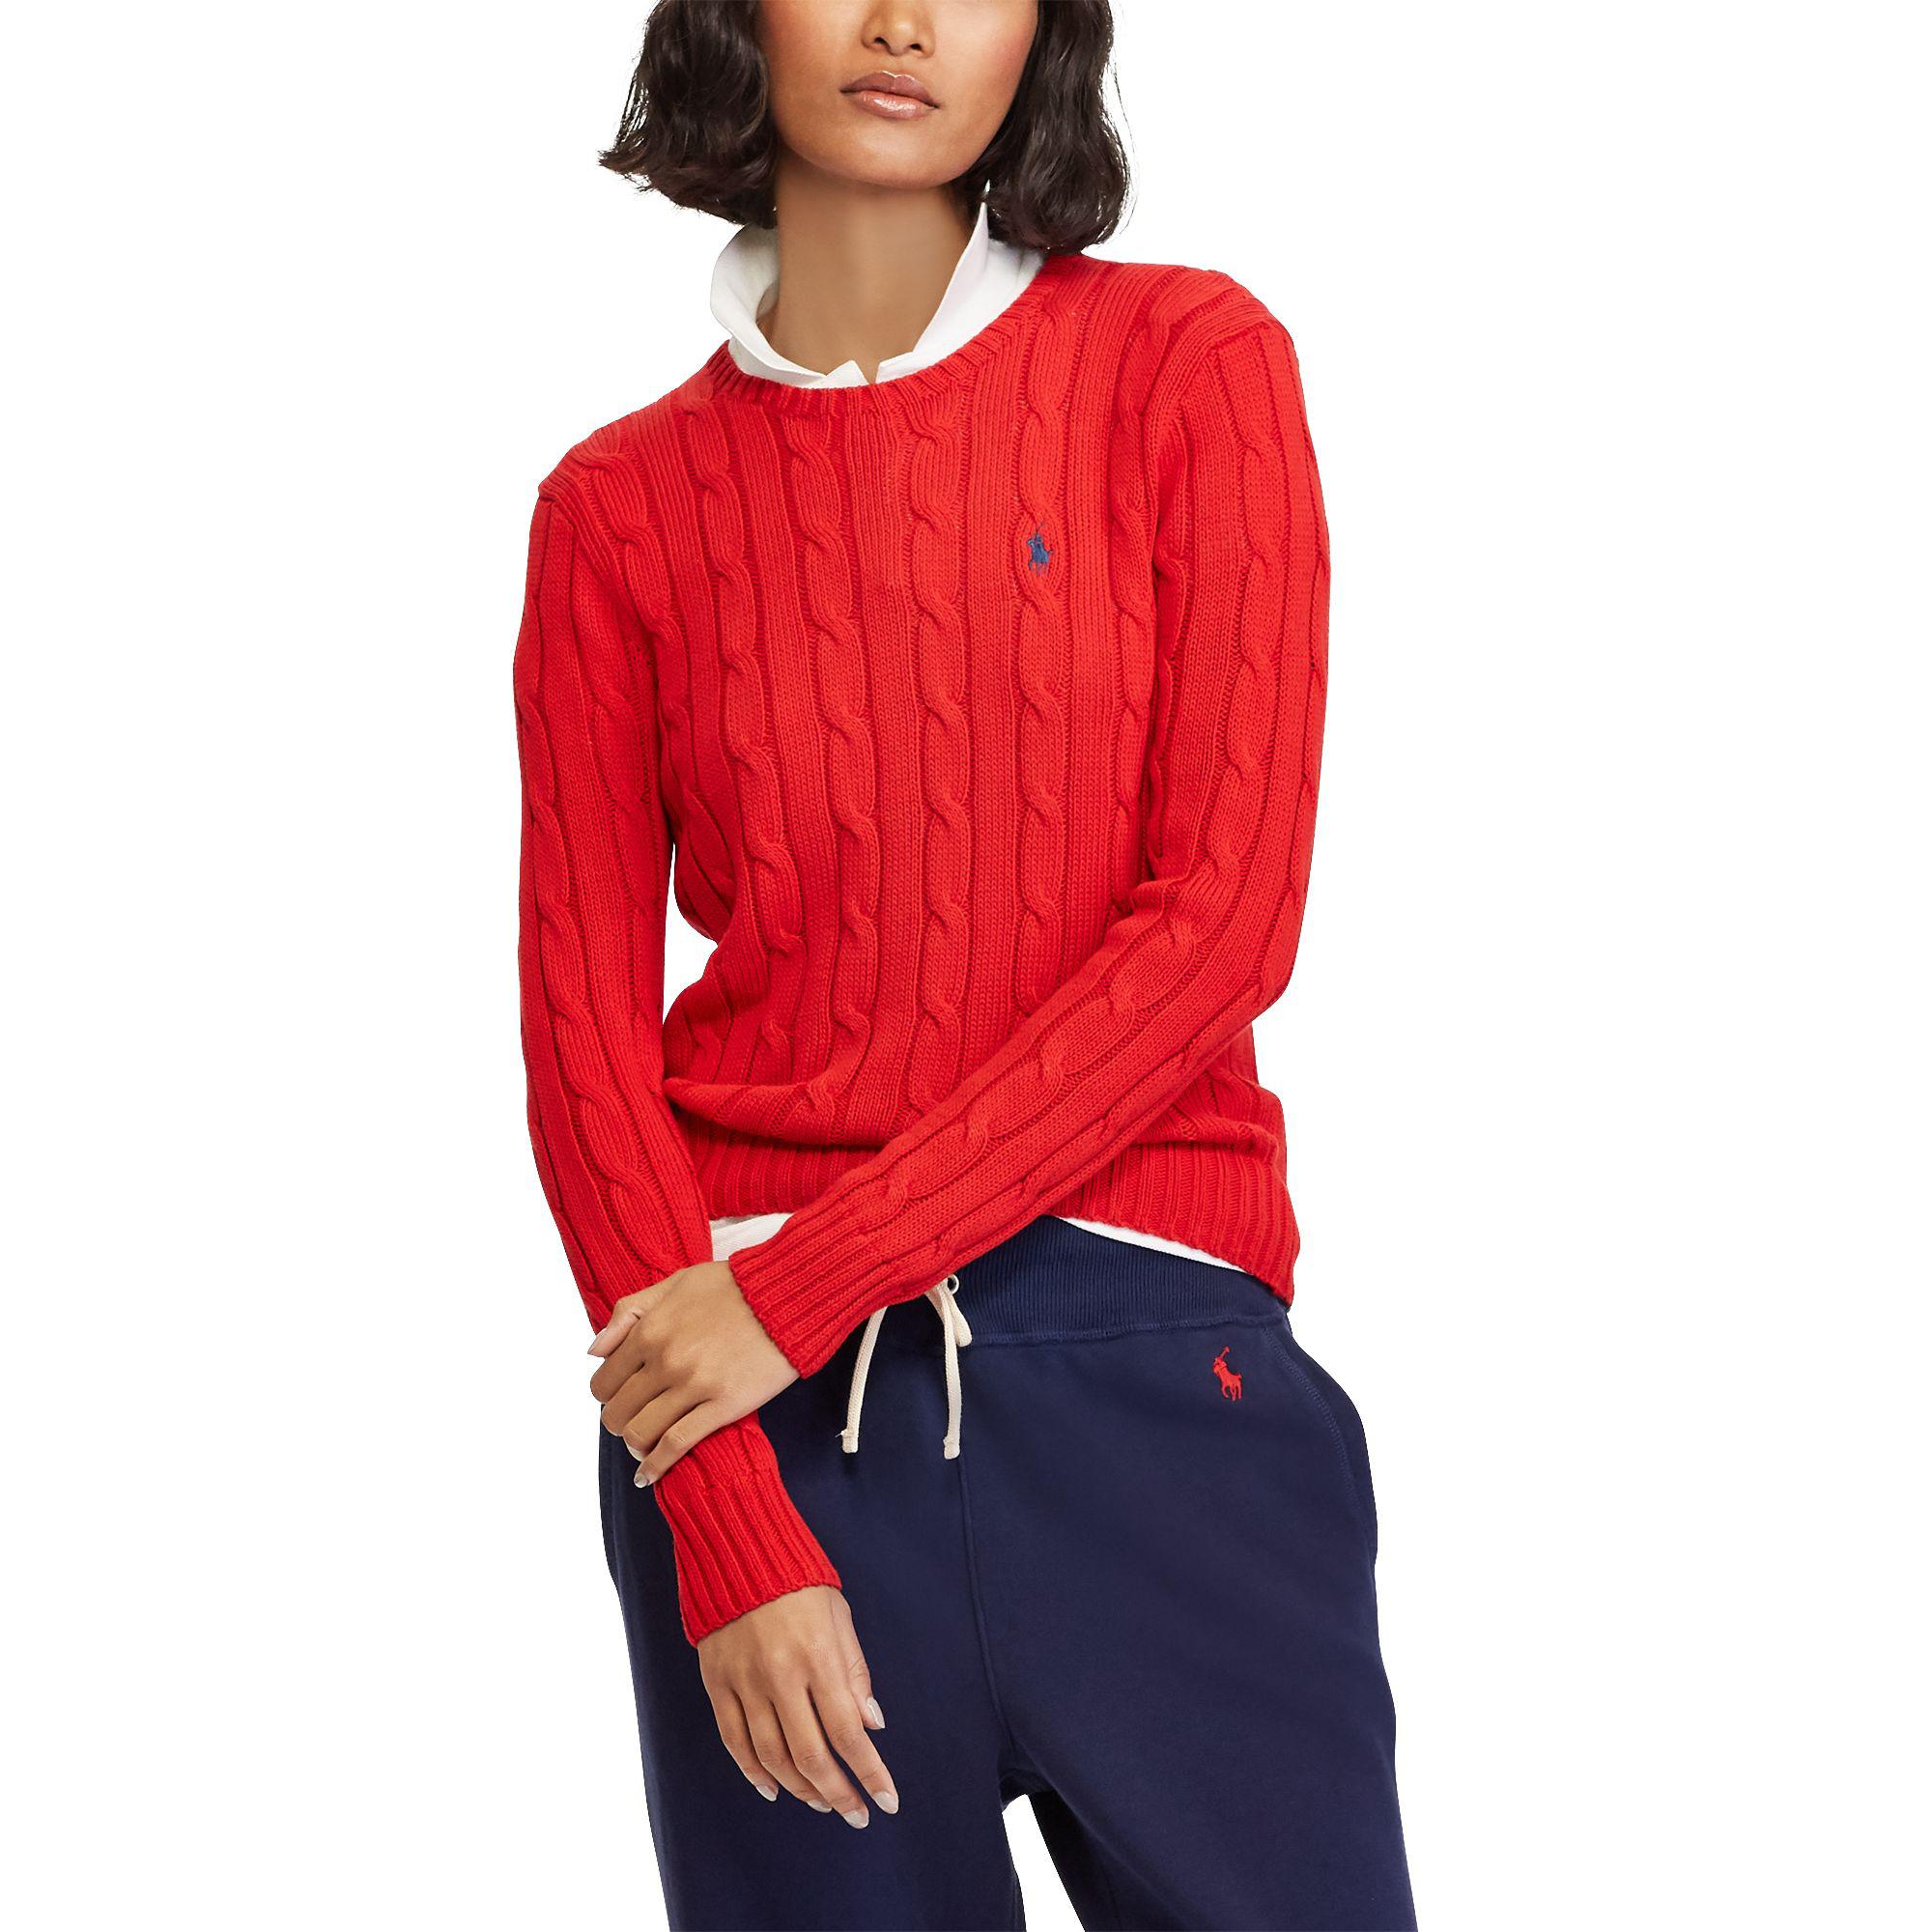 Polo Ralph Lauren Cable-knit Cotton Sweater in Bright Red (Red) | Lyst